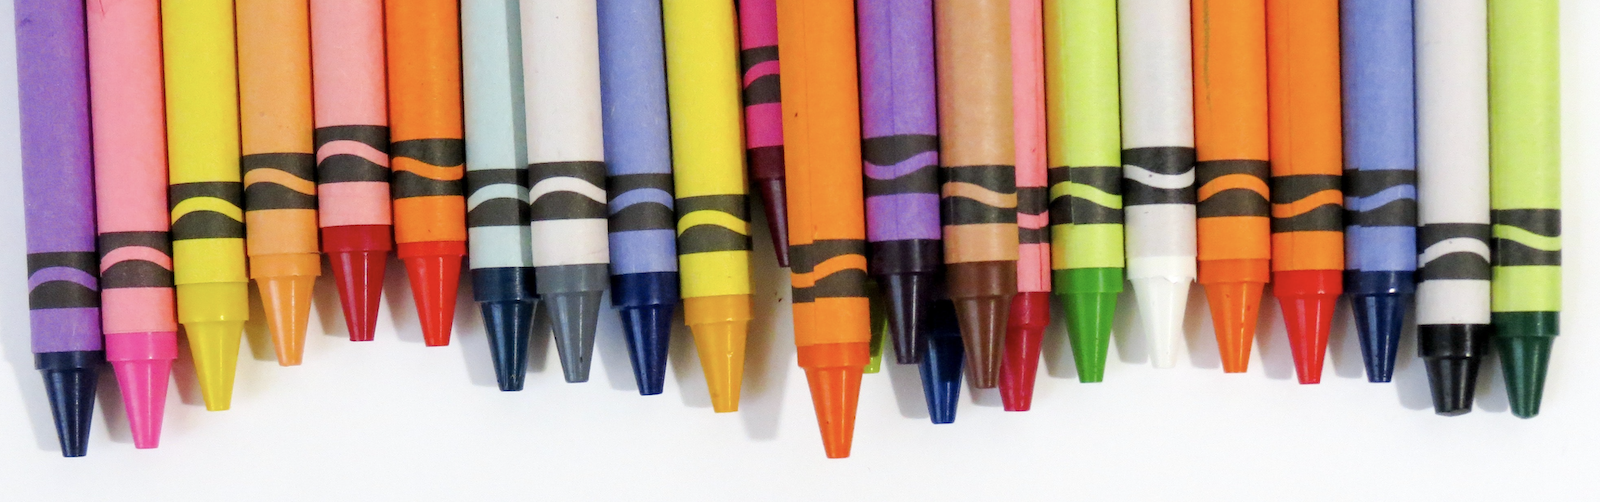 Colored crayons against a white background